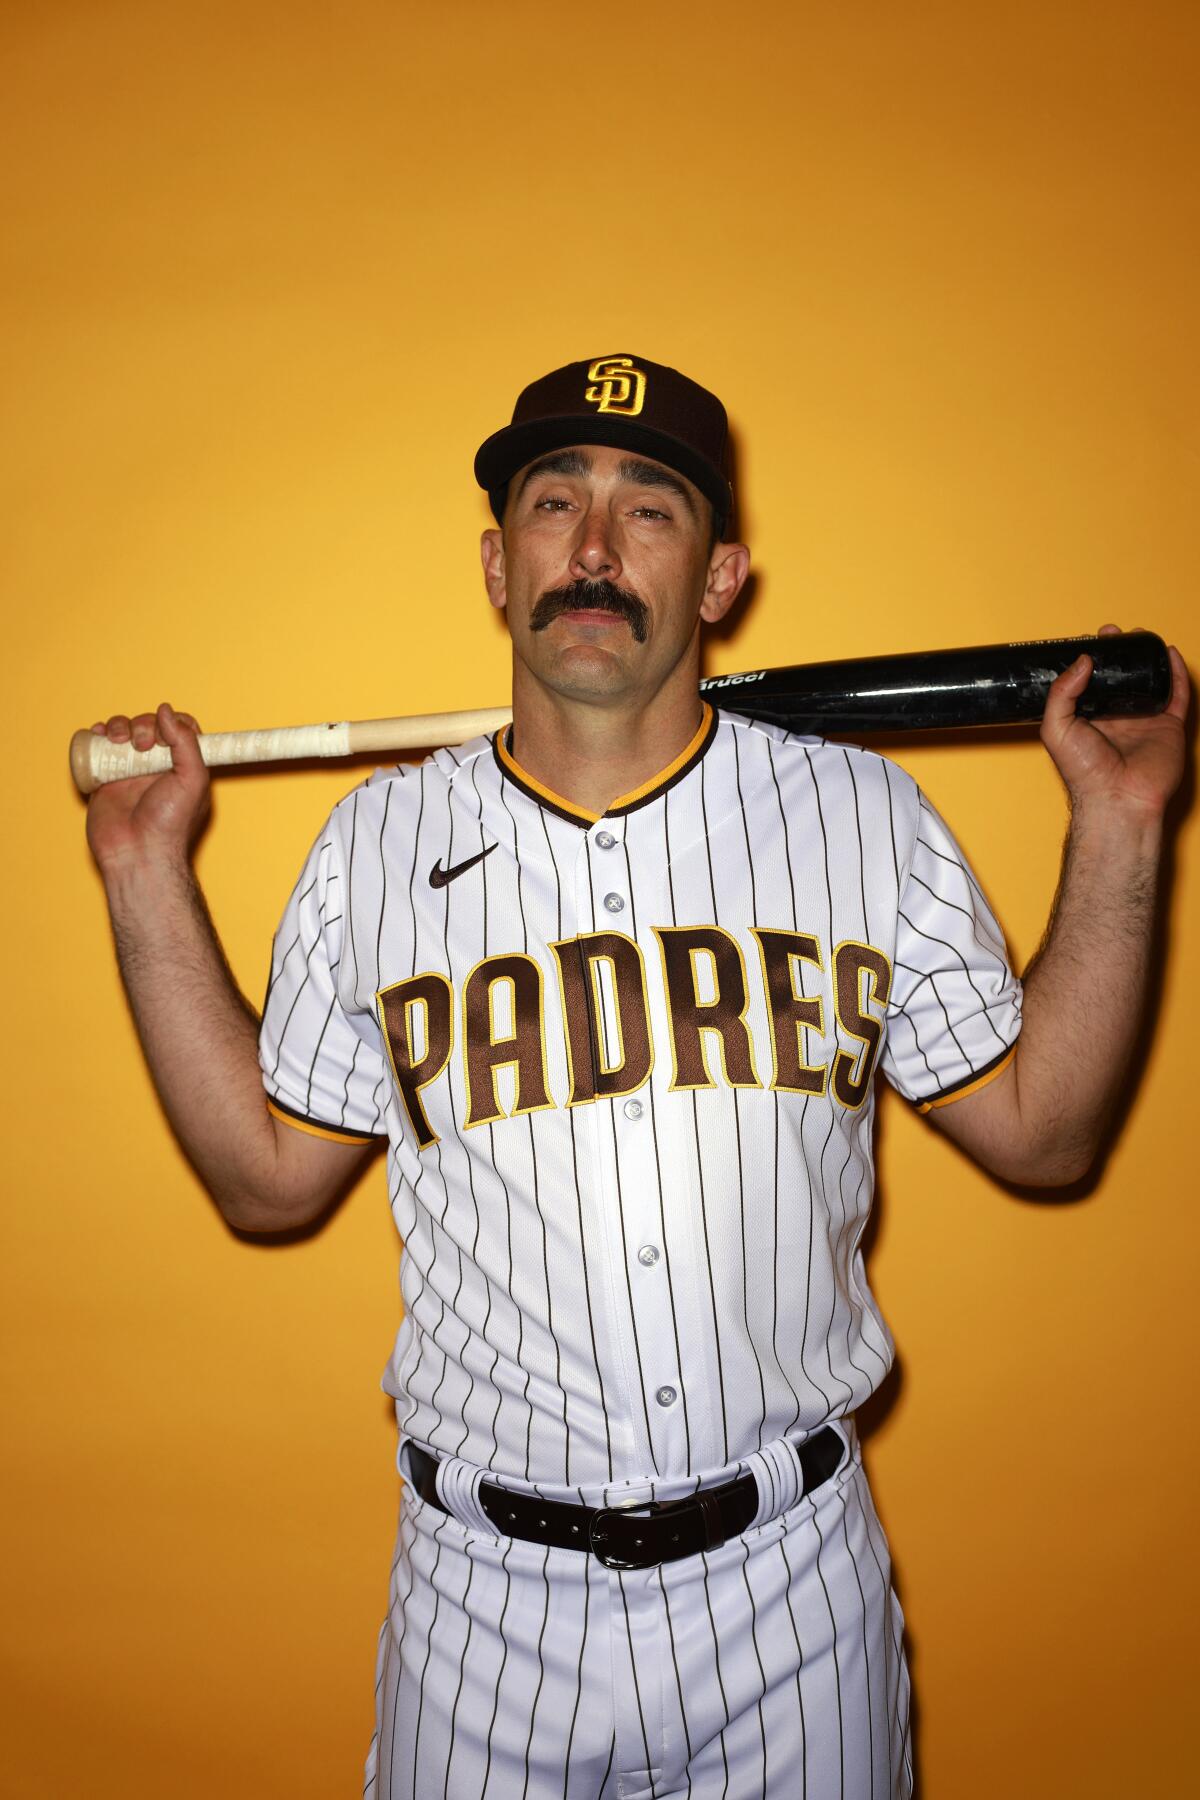 Padres DH Matt Carpenter homered, doubled twice and drove in five